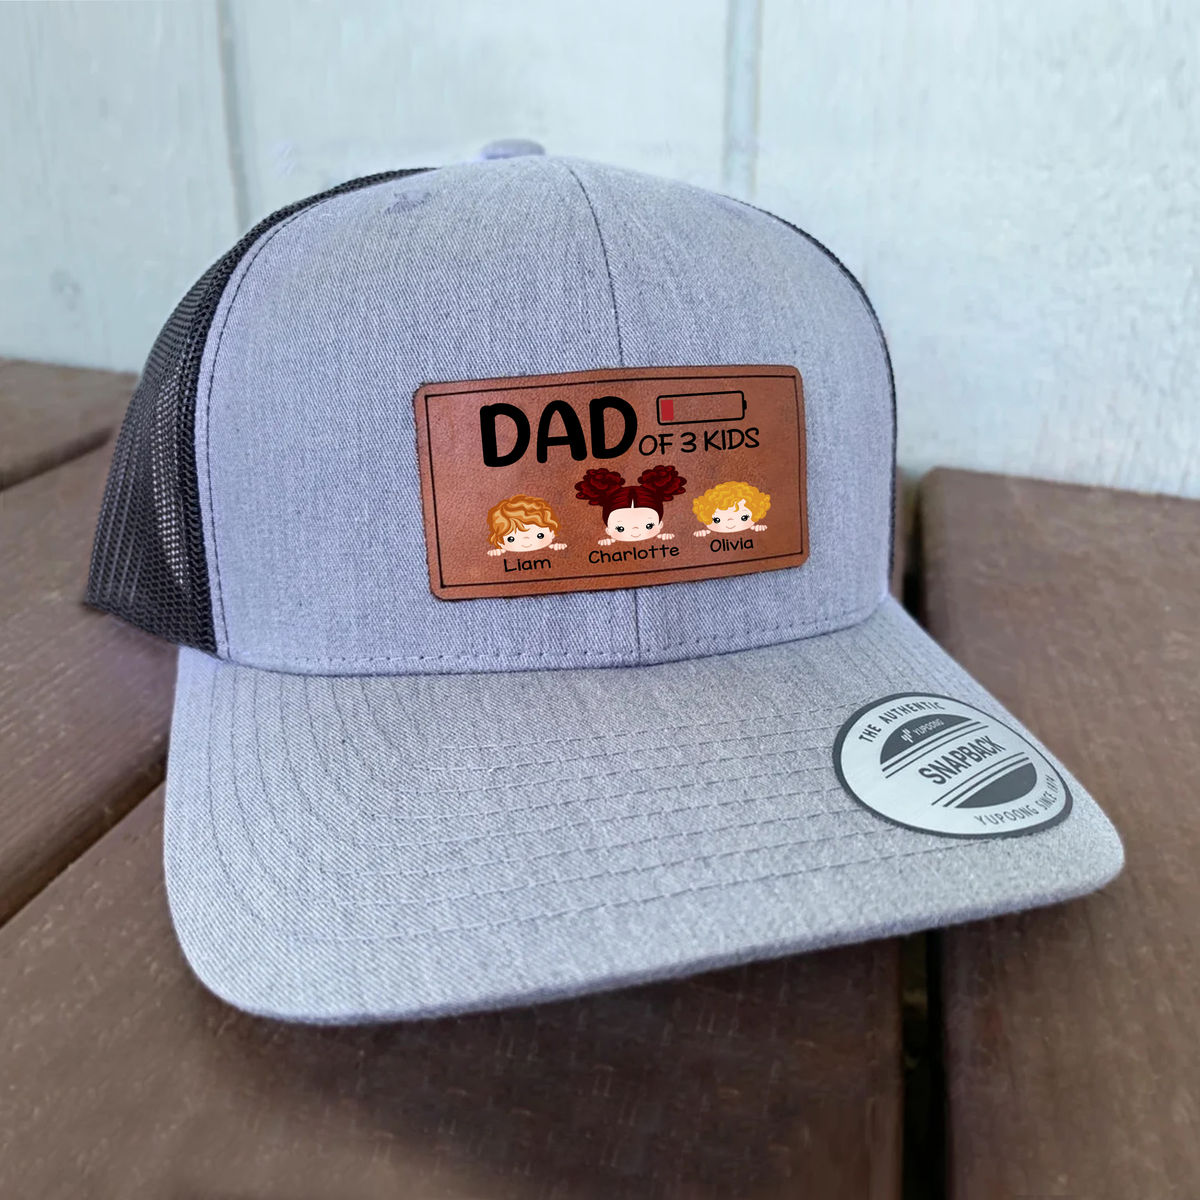 Dad Hats - Dad Of Kid - Personalized Cap Ver 2 - Gifts For Him, Dad, Family Members, Father's Day Gifts, Birthday, Xmas Gifts_2